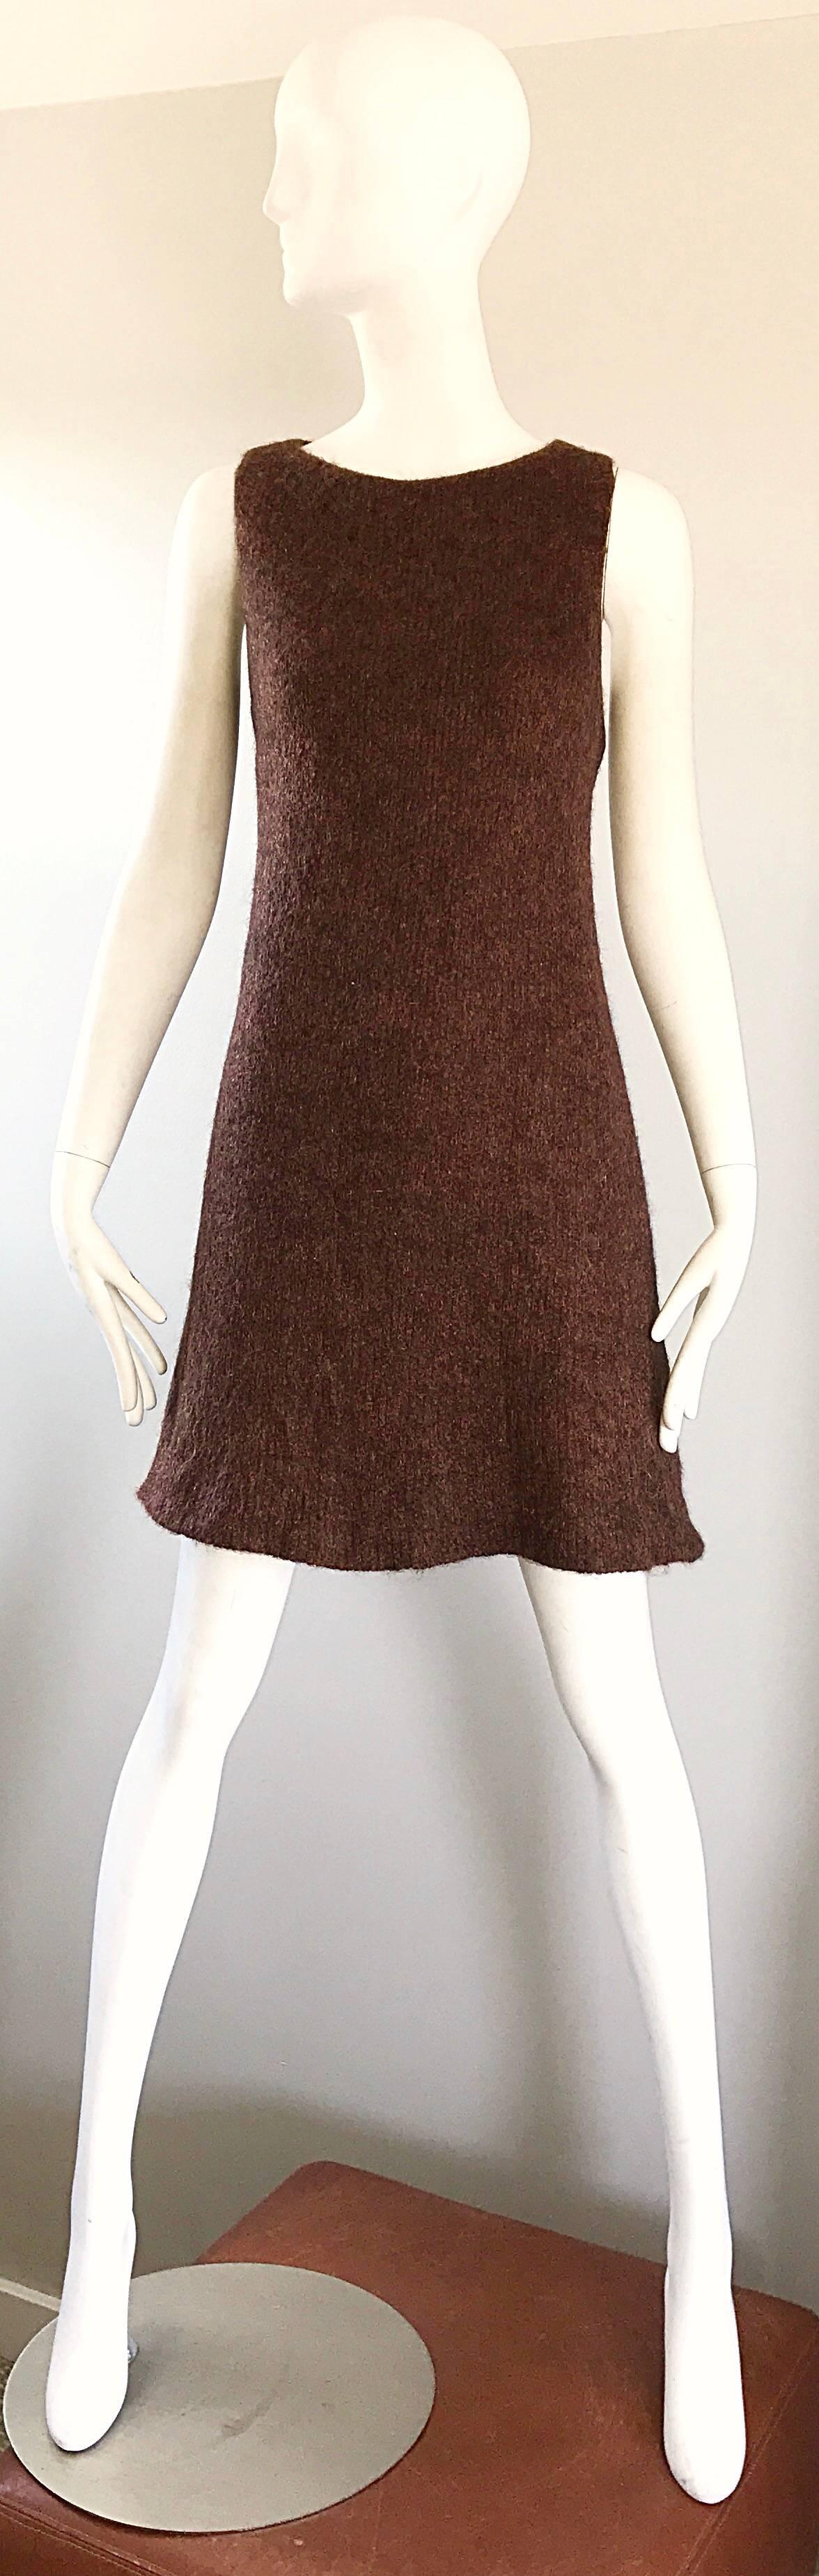 Classic and effortlessly chic 1960s GUY LAROCHE sleeveless A-line dress! Features a soft brown and copper mohair wool blend, that gives just the slightest bit of sparkle. Fitted bodice with a flattering and forgiving full skirt. Lined in a soft